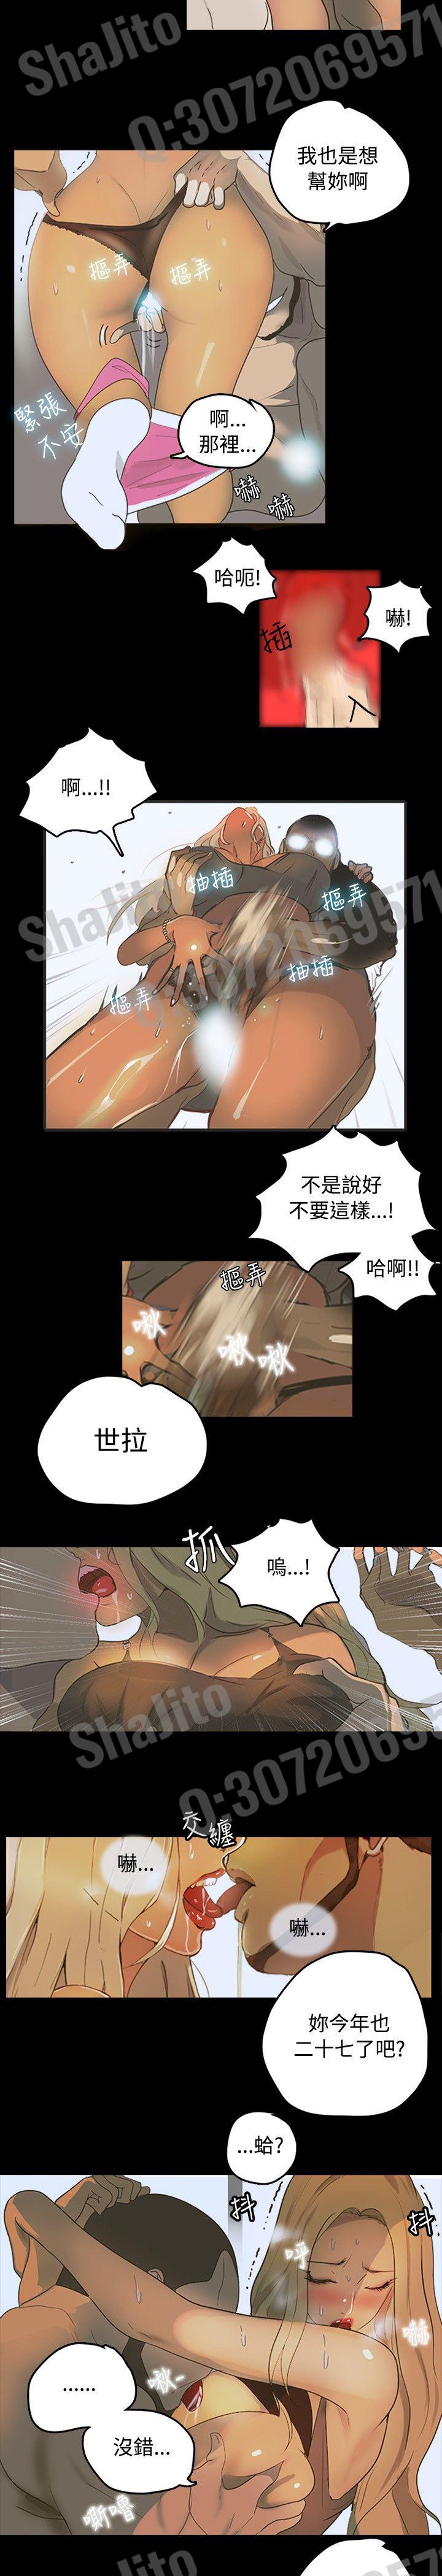 Stepbrother PC Goddes Room 女神网咖 1-3 Chinese Little - Page 12